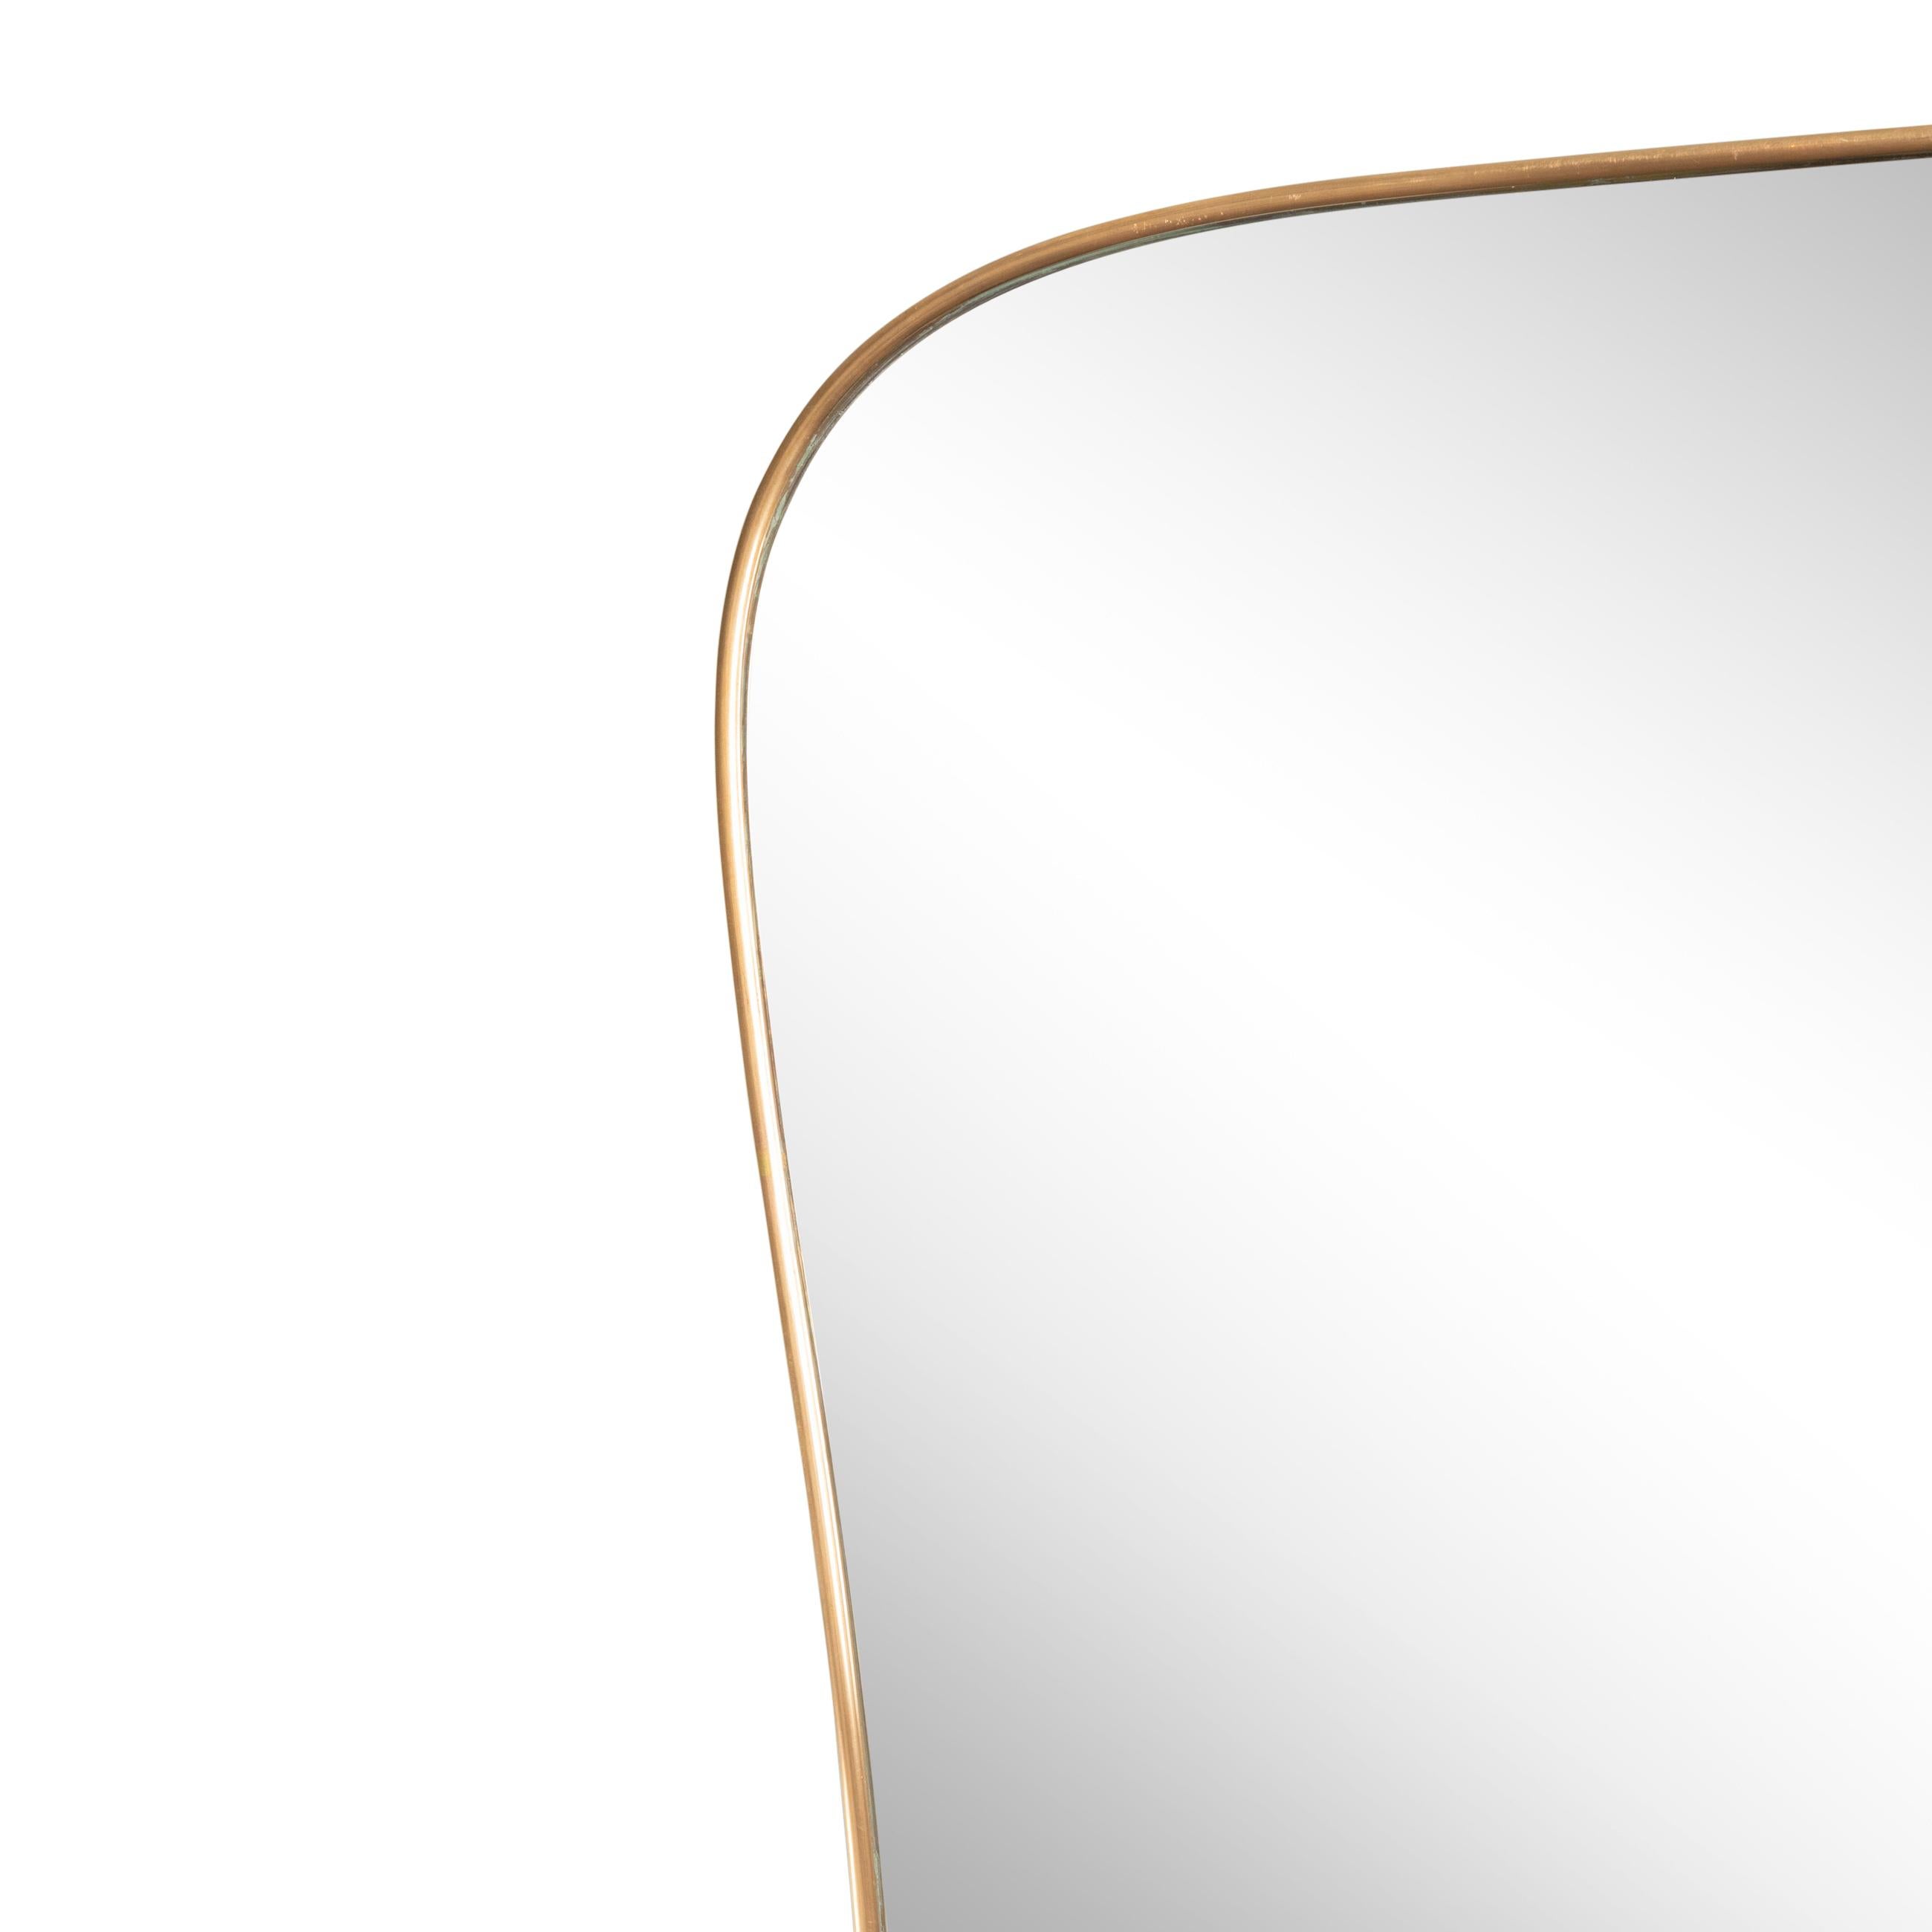 Brass Framed Mirror in the style of Gio Ponti
Italy, circa 1950. 

Dimensions, Measures: 

Hauteur / Height : 100 cm / 39.3 inch 
Largeur / Width : 57,5 cm / 22.4 inch 
Profondeur / Depth : 2,5 cm /0, 98 inch.
 